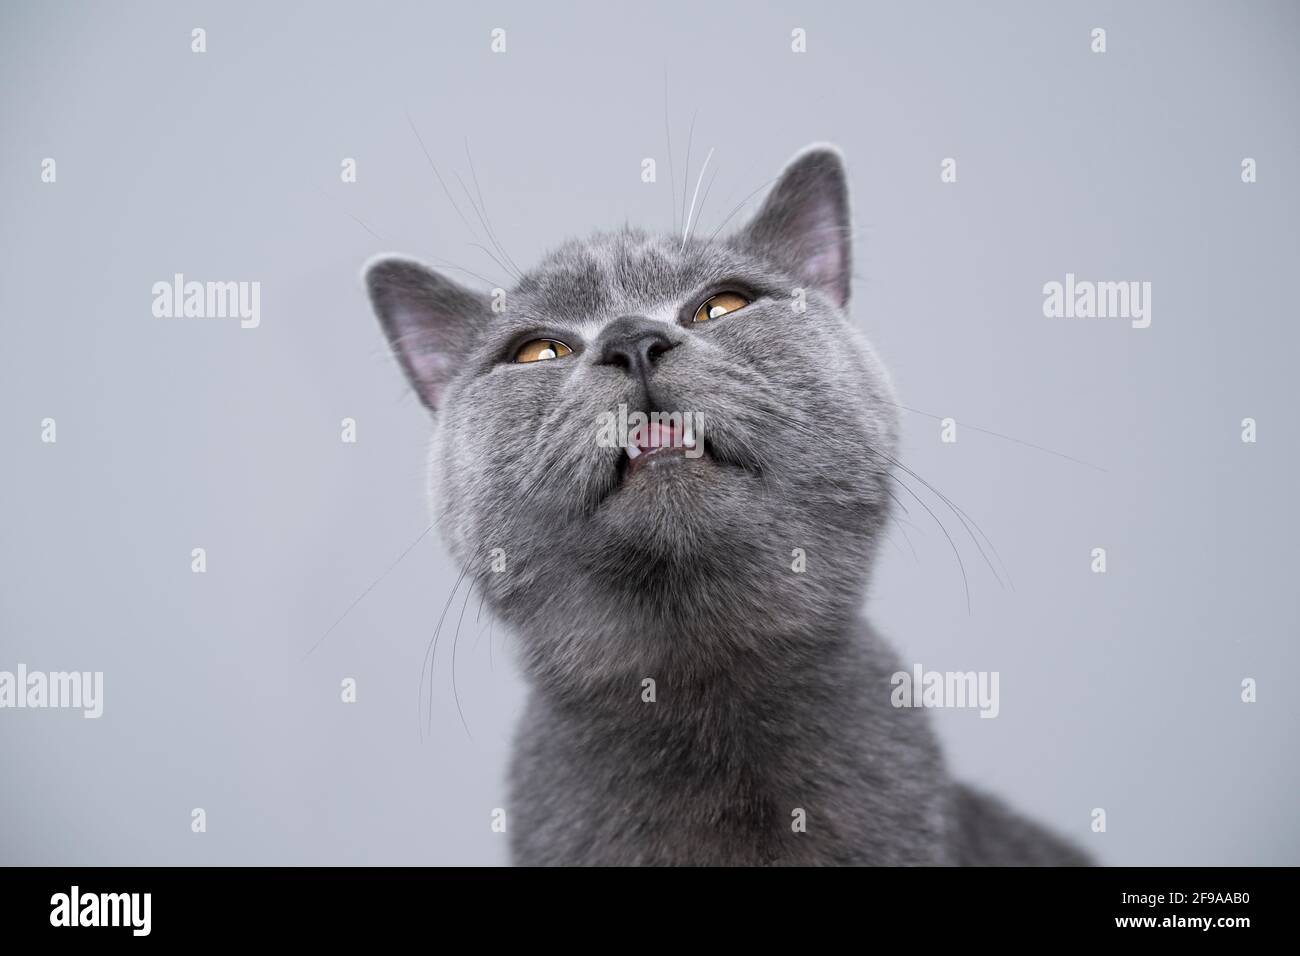 6 month old blue british shorthair kitten making silly face with copy space Stock Photo